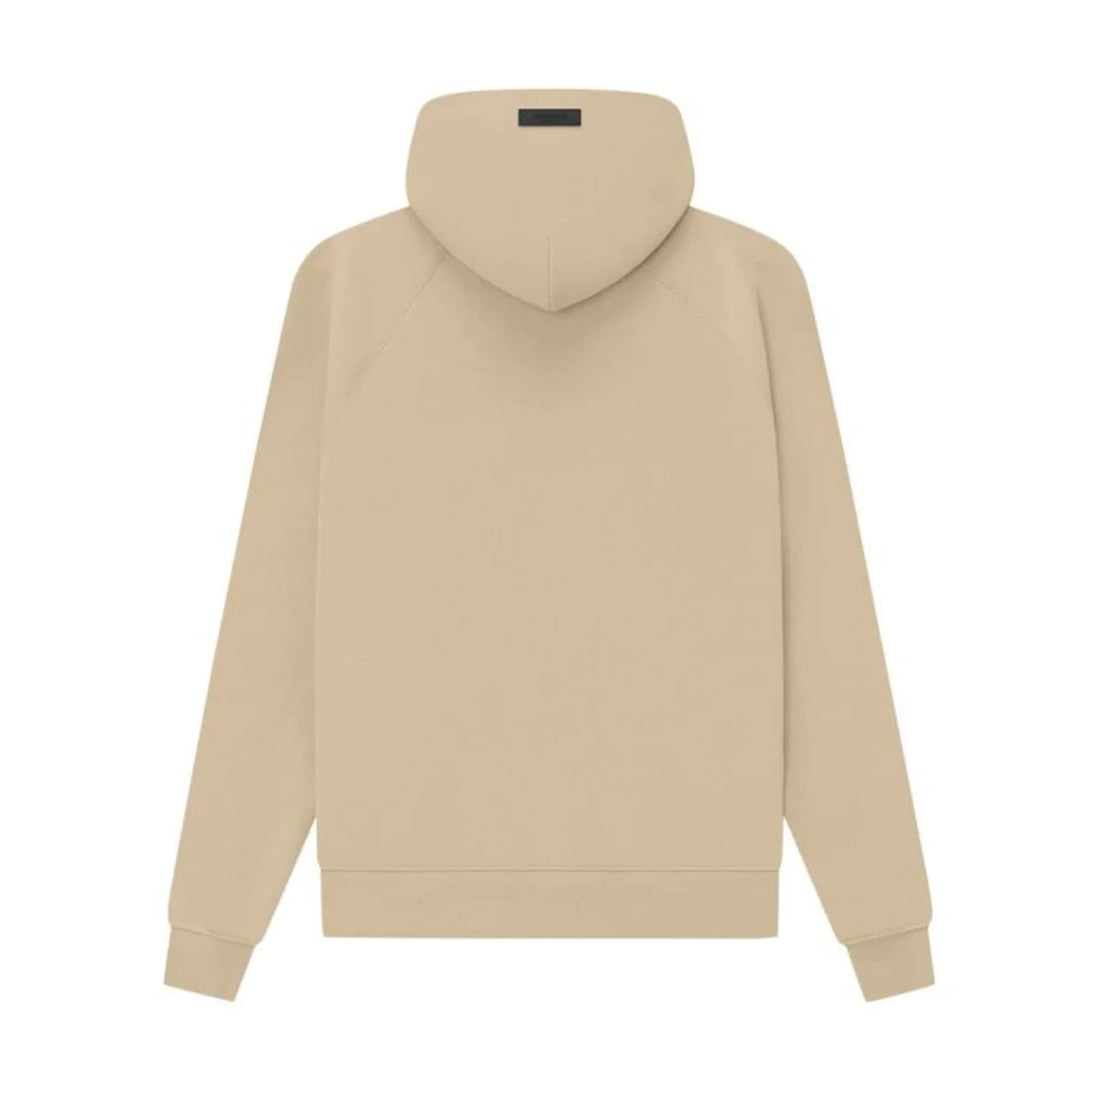 FEAR OF GOD ESSENTIALS SAND HOODIE